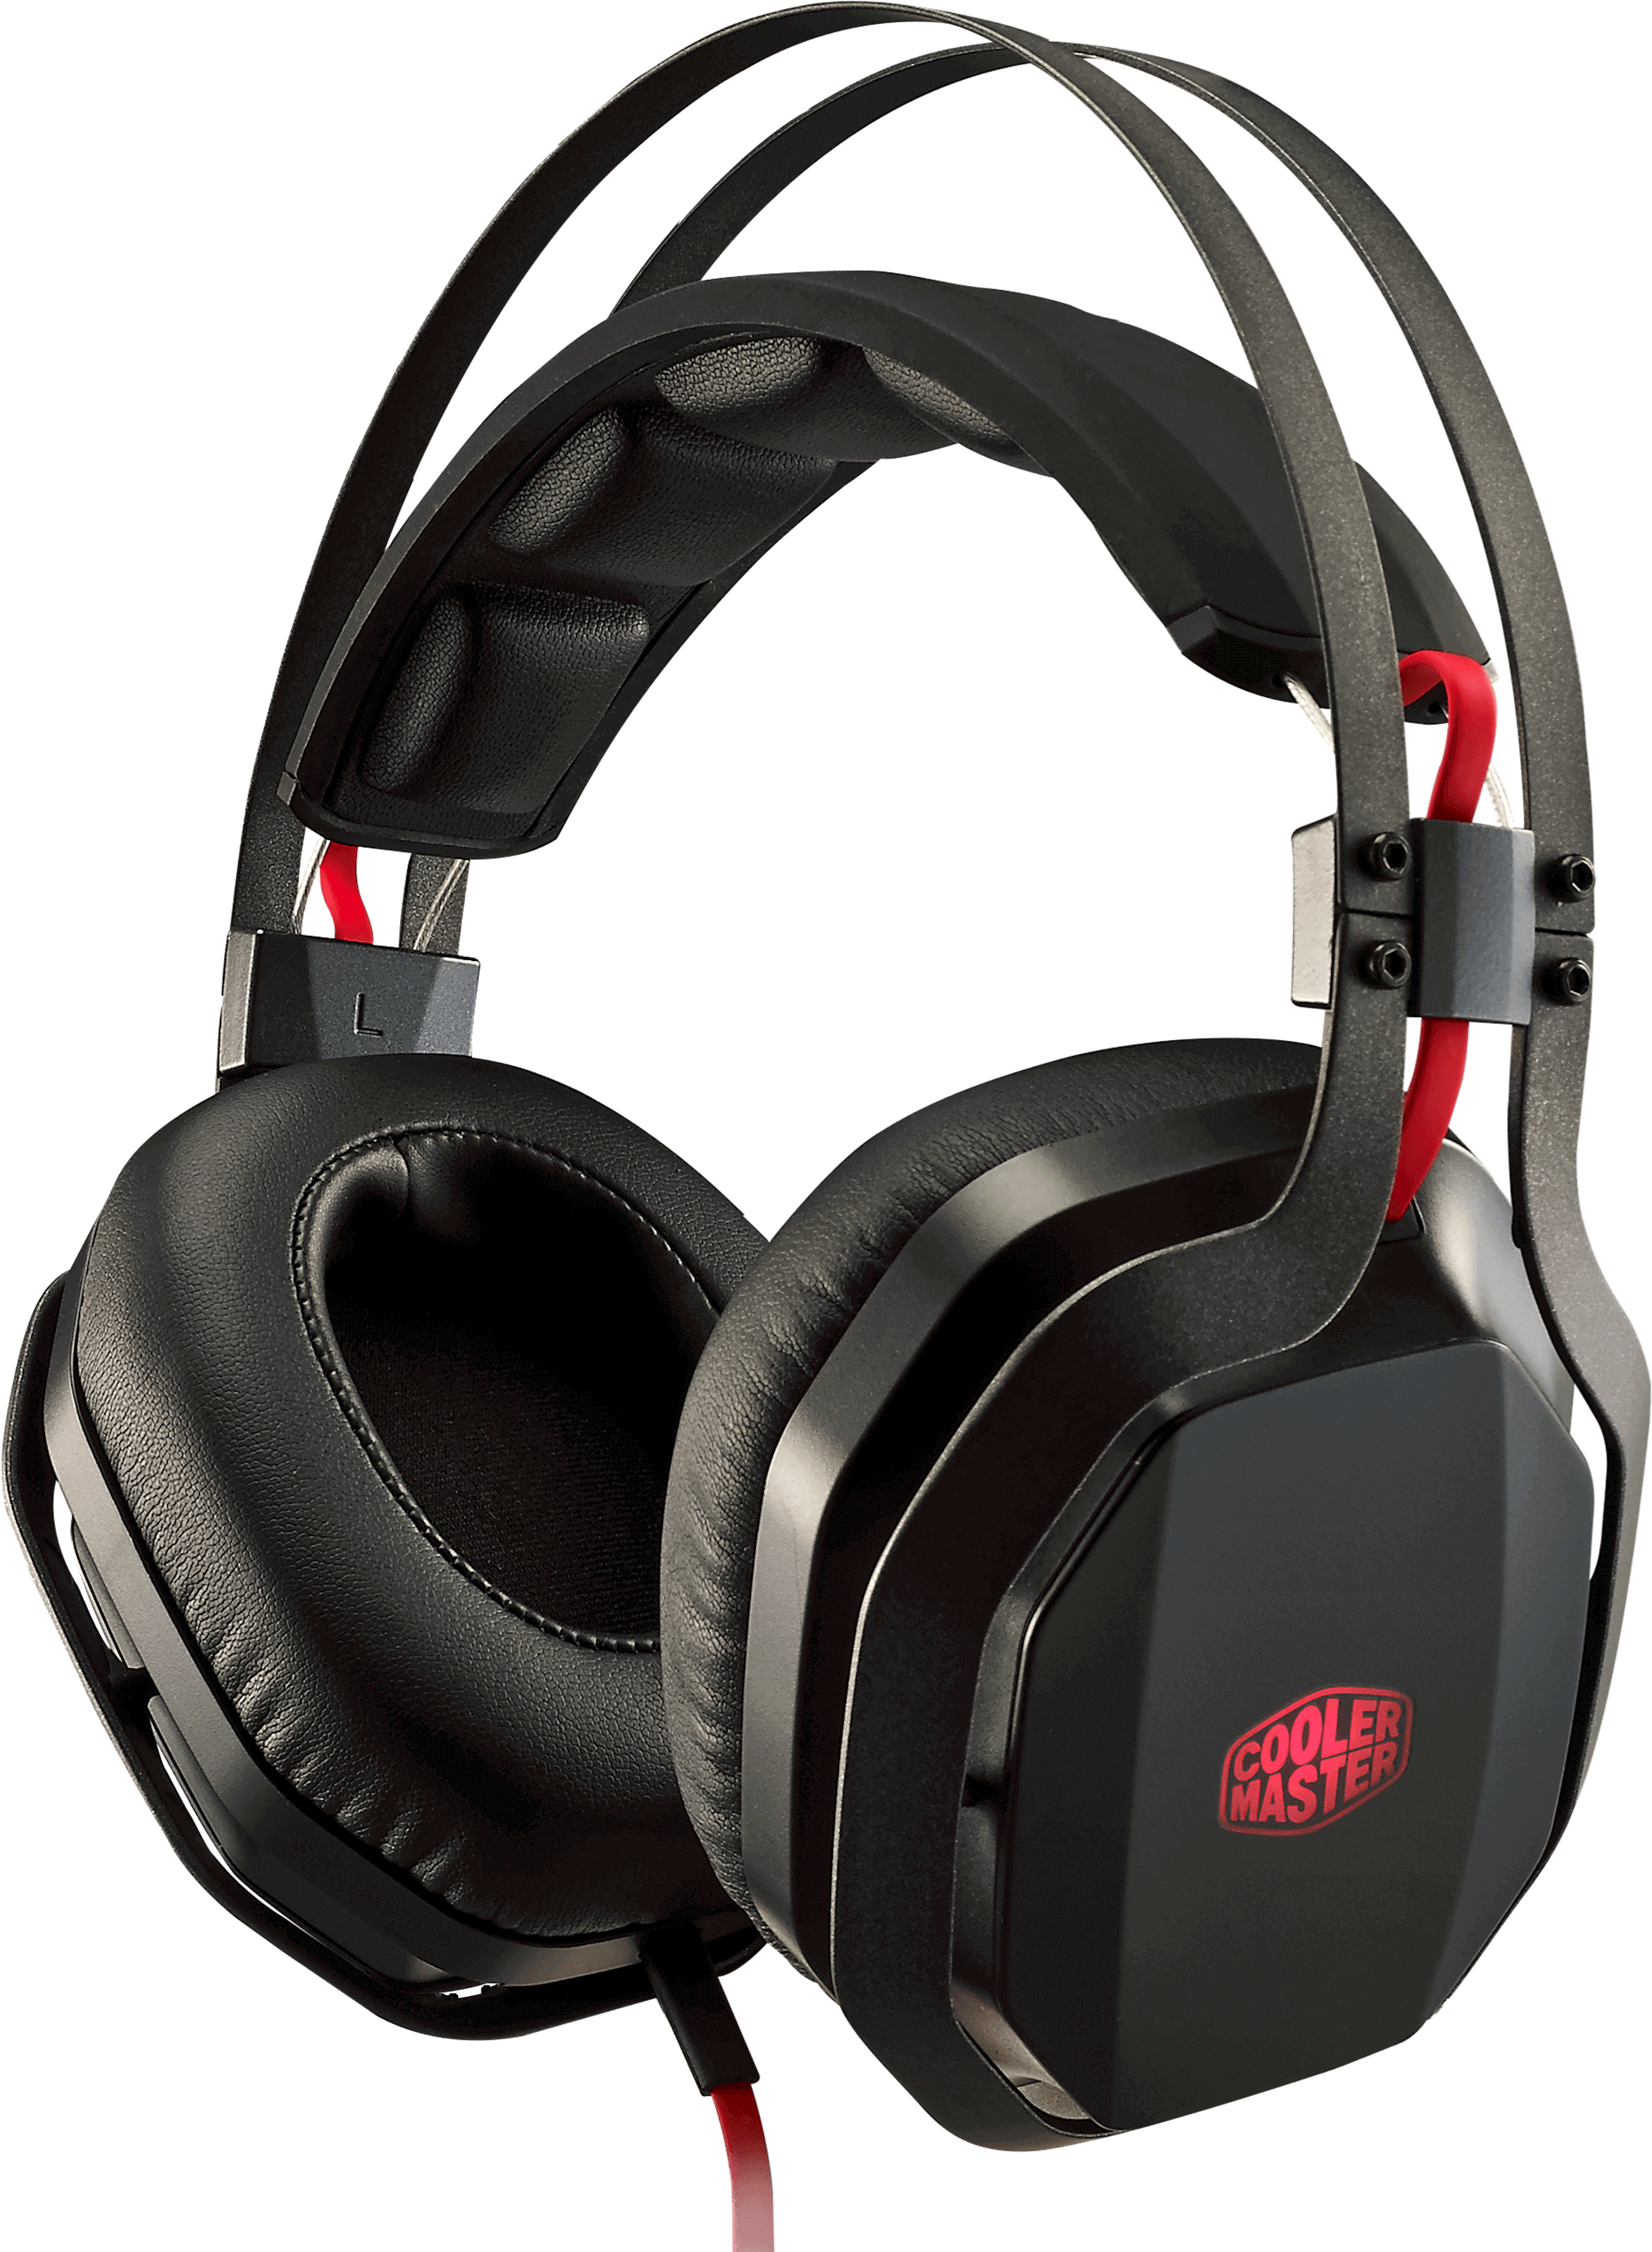 A Black Headphones With Red Accents